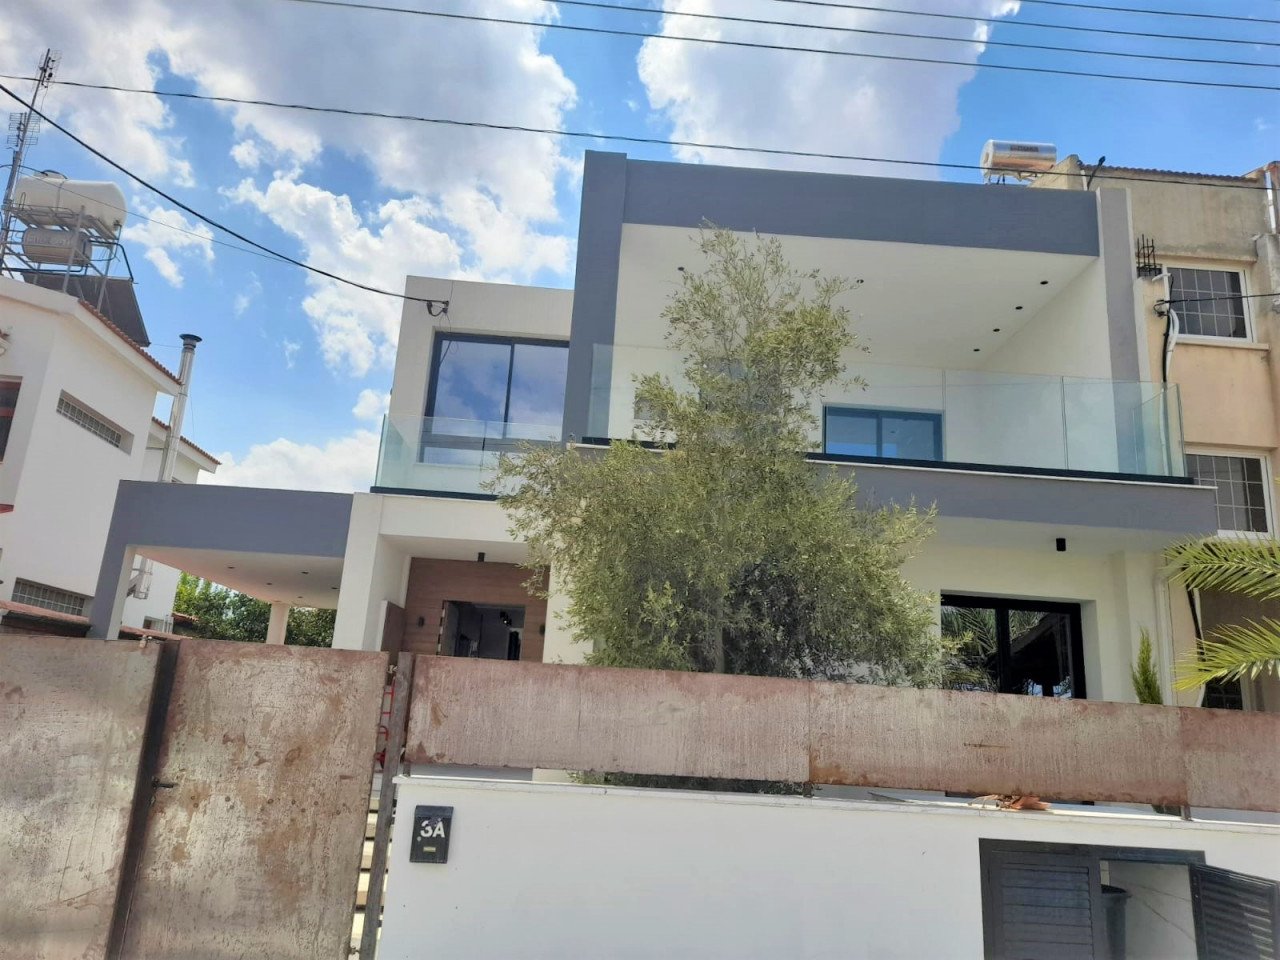 Property for Rent: House (Semi detached) in Kalithea, Nicosia for Rent | Key Realtor Cyprus